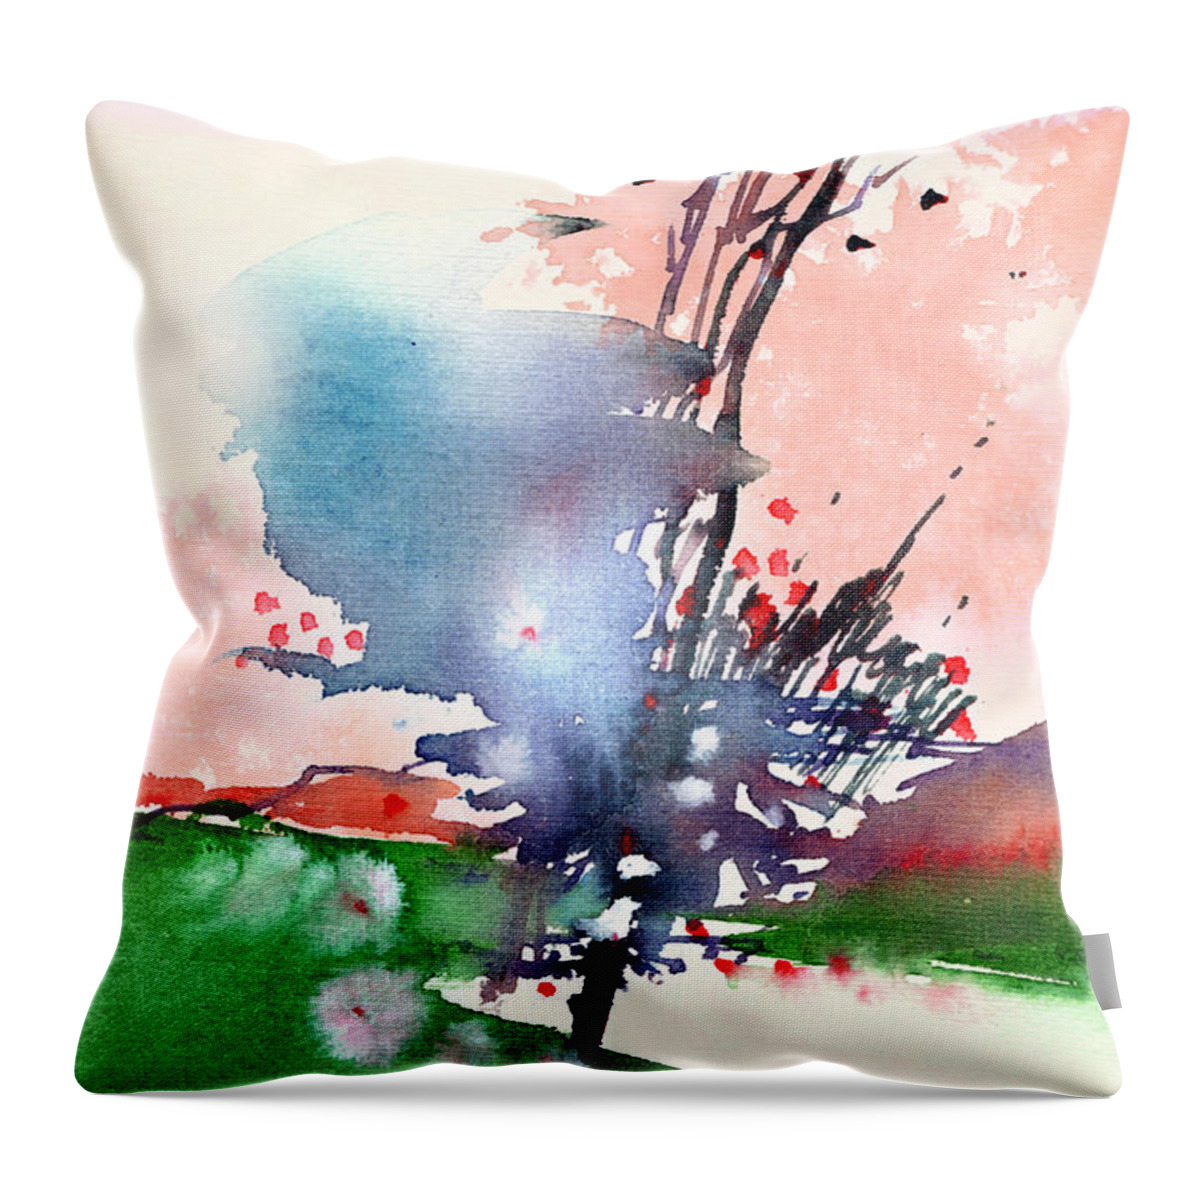 Landscape Throw Pillow featuring the painting Light 2 by Anil Nene